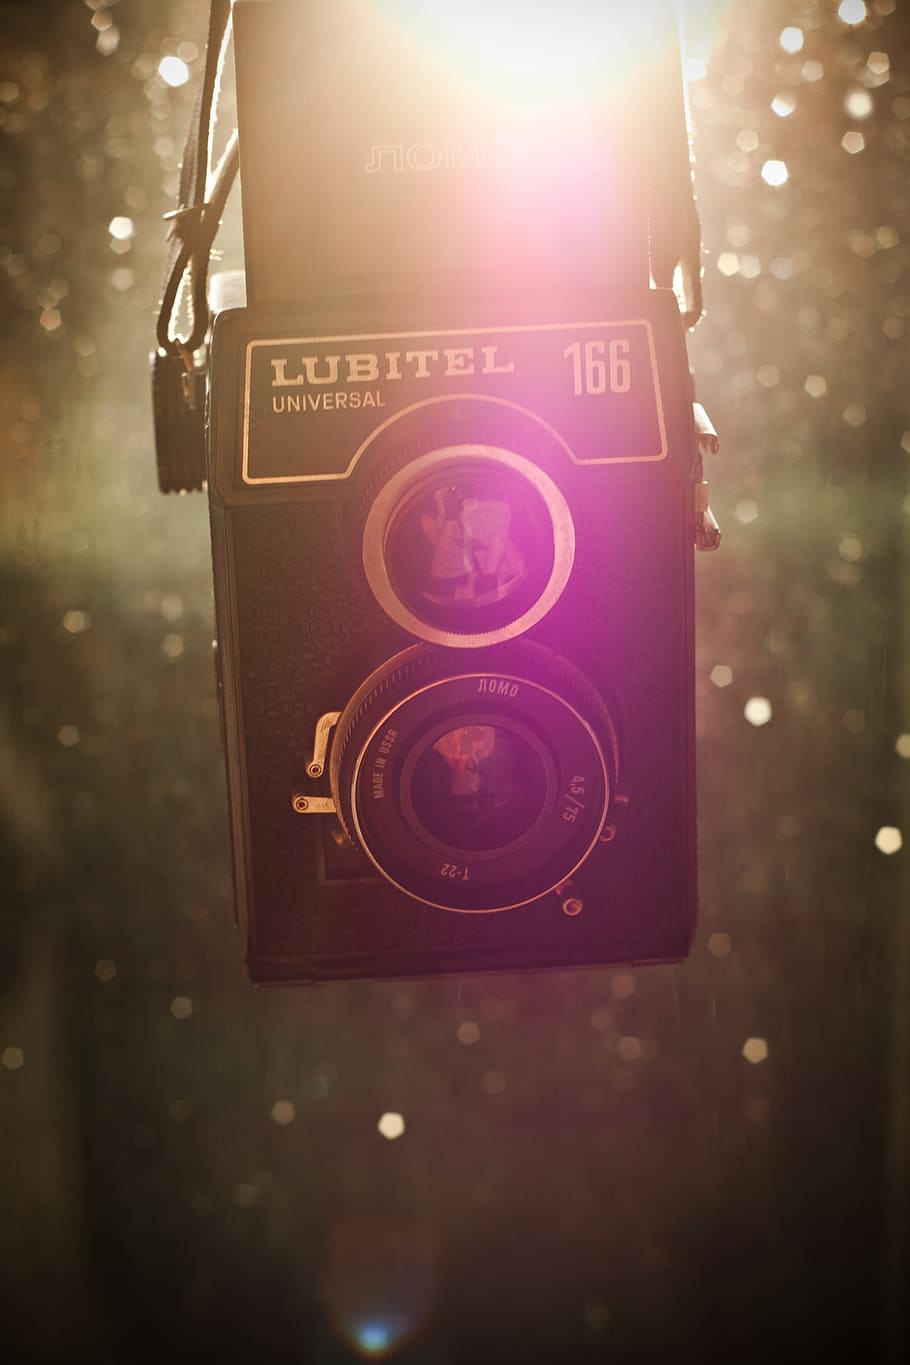 Camera, Photography, Picture, Old, art, lens flare, music, close-up, outdoors, day